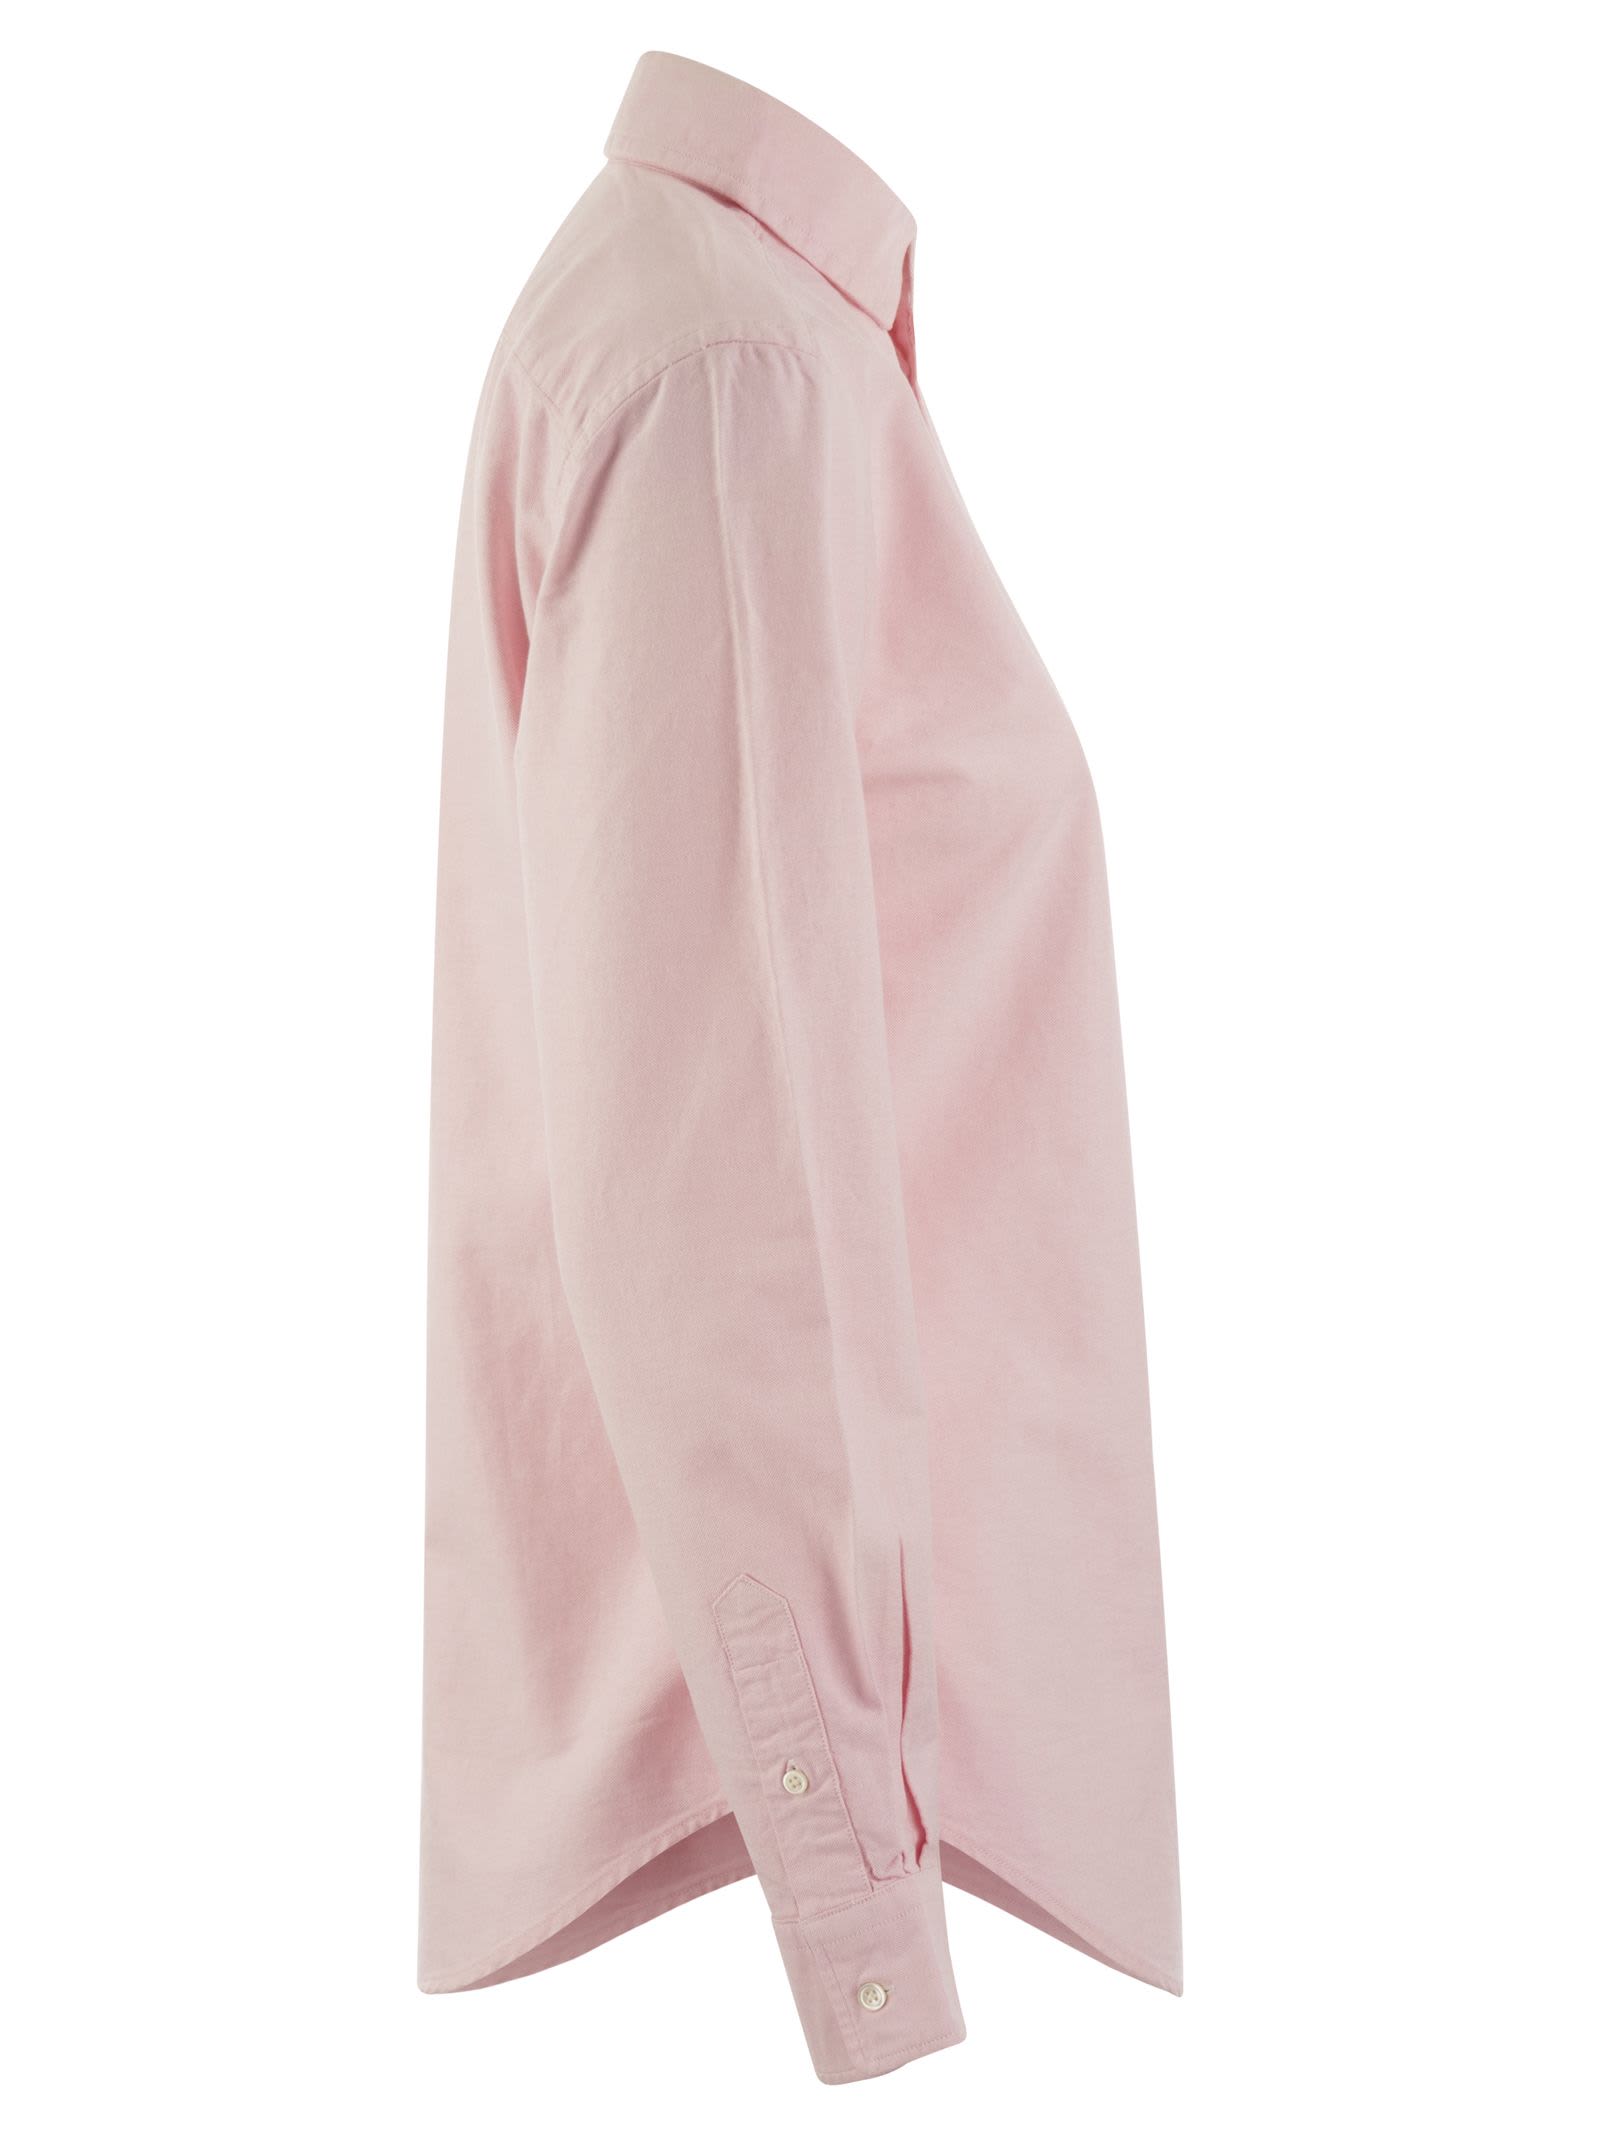 Shop Polo Ralph Lauren Classic-fit Oxford Shirt In Pink